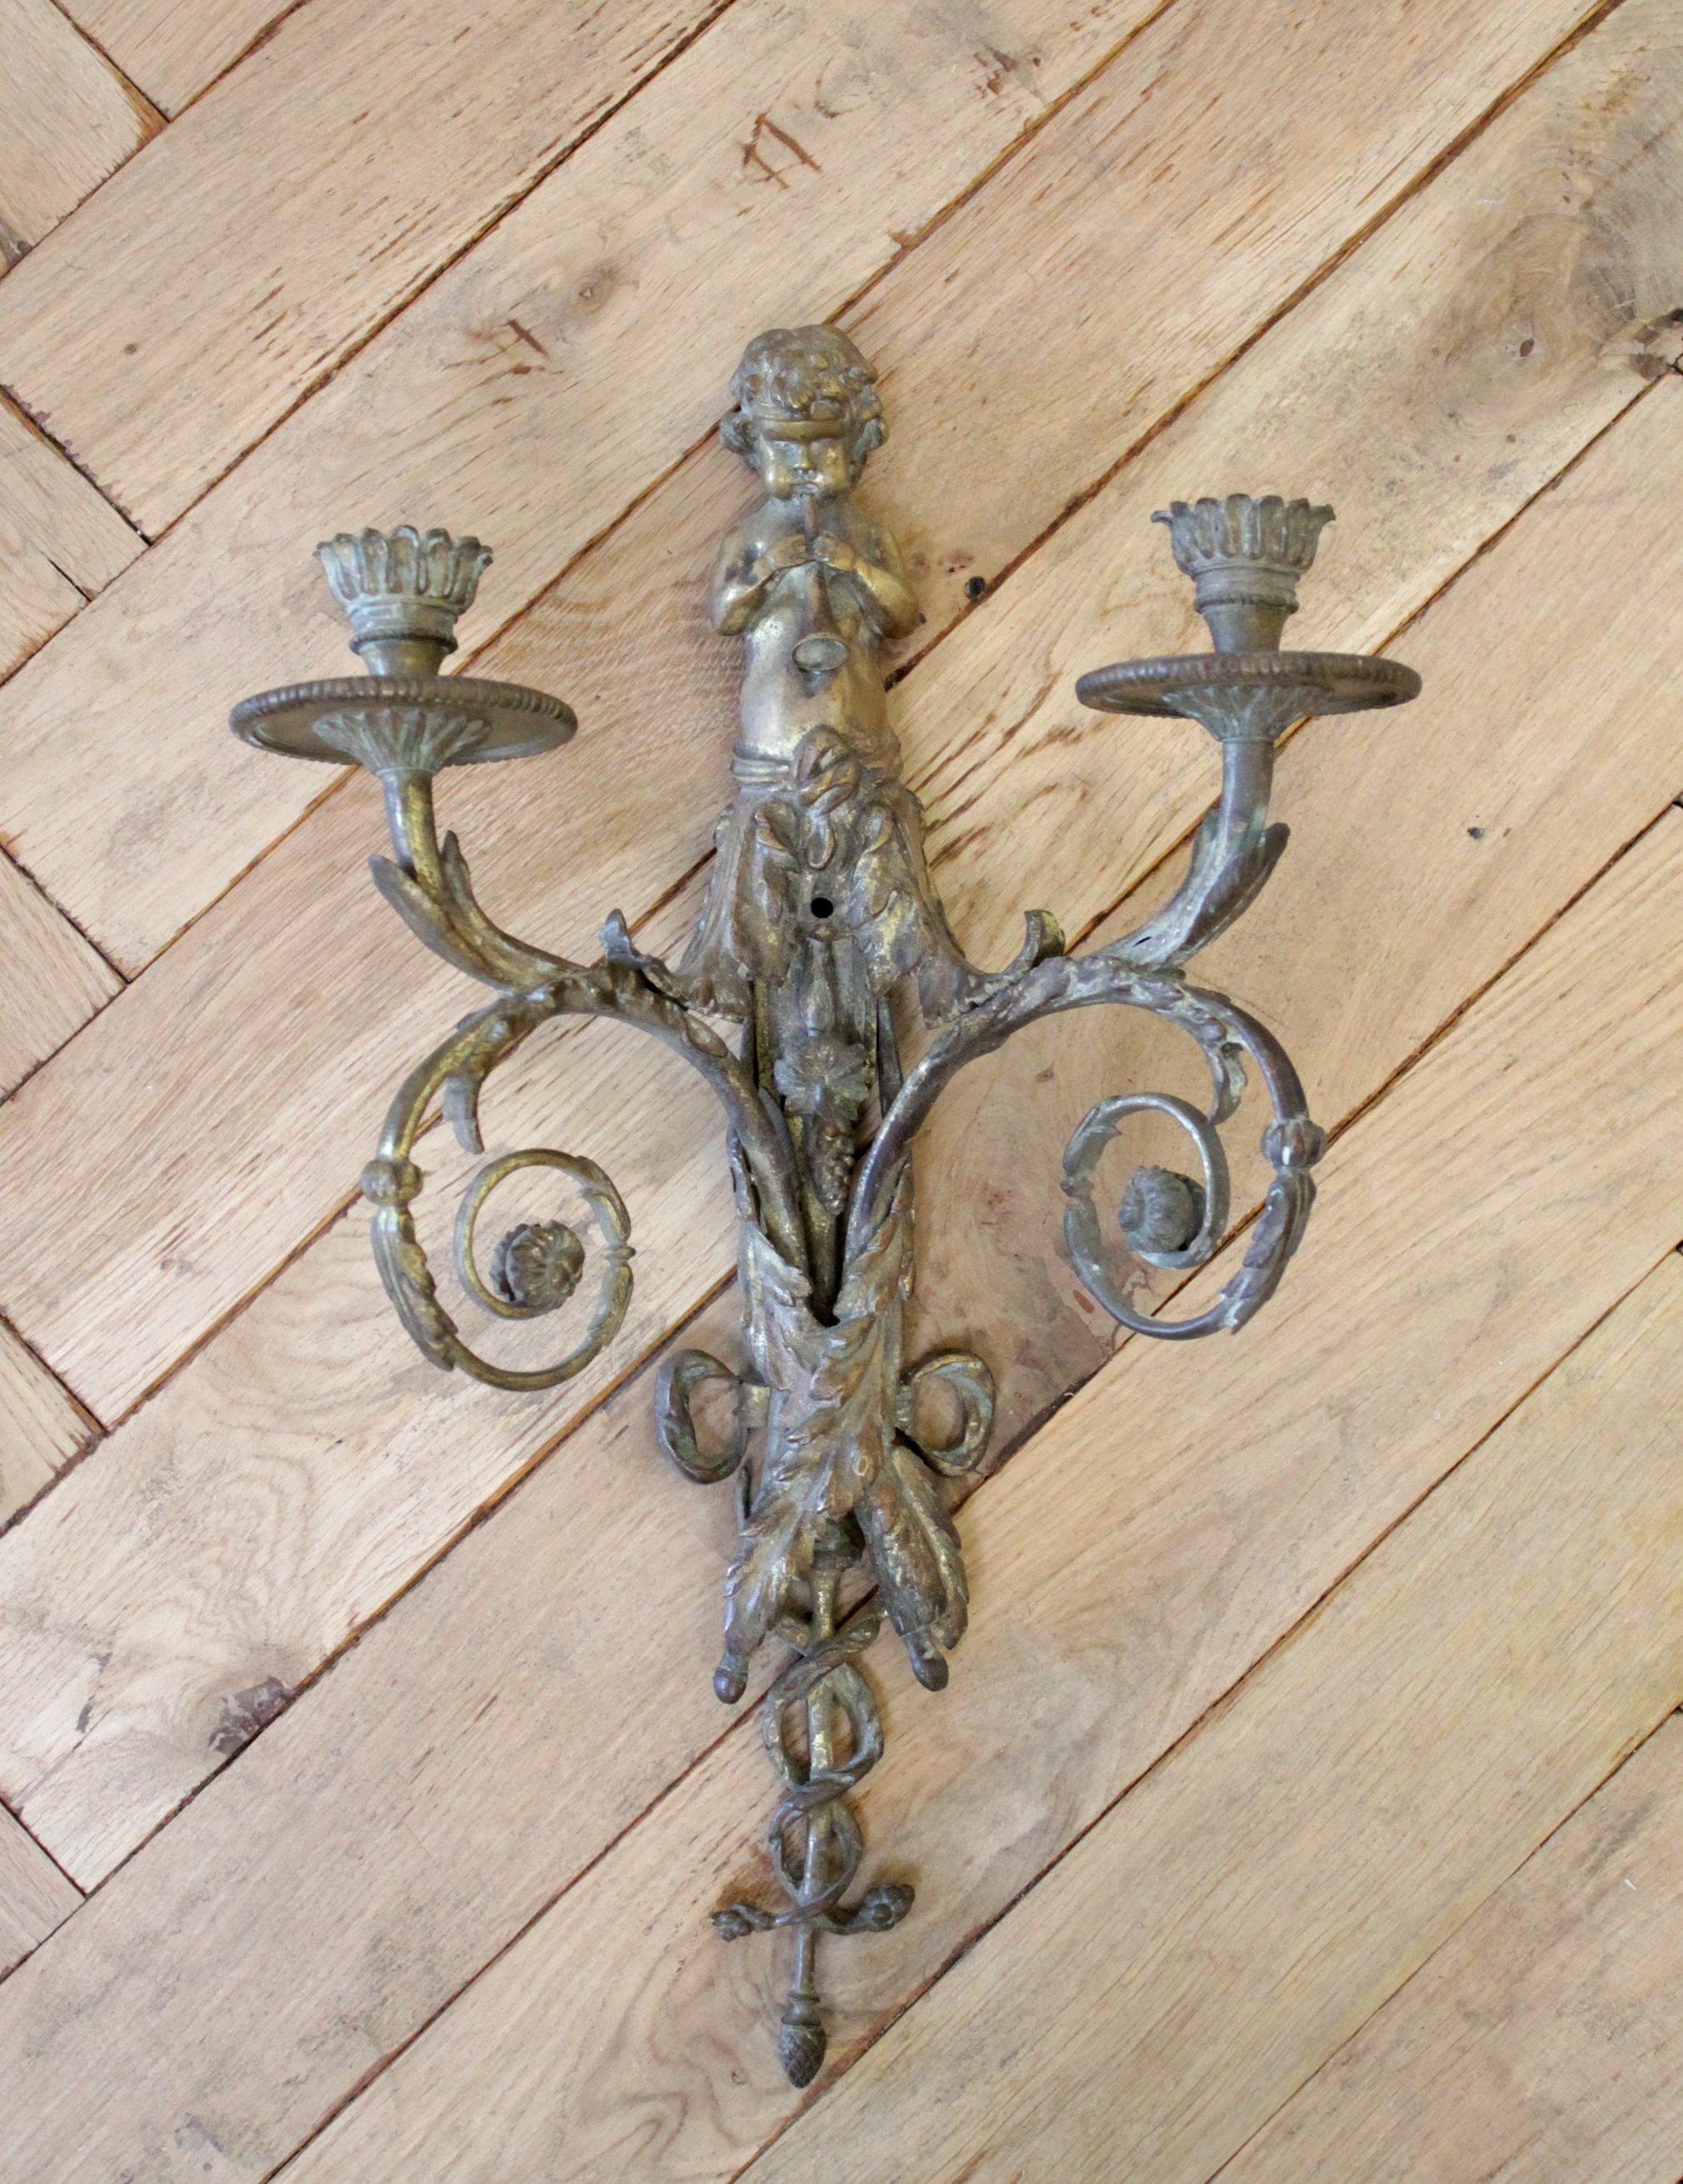 Antique brass French sconce with cherub playing the flute. Great patina, ready to hang on the wall. We just have 1 only, not a pair.
This sconce uses candles, and measures: 10